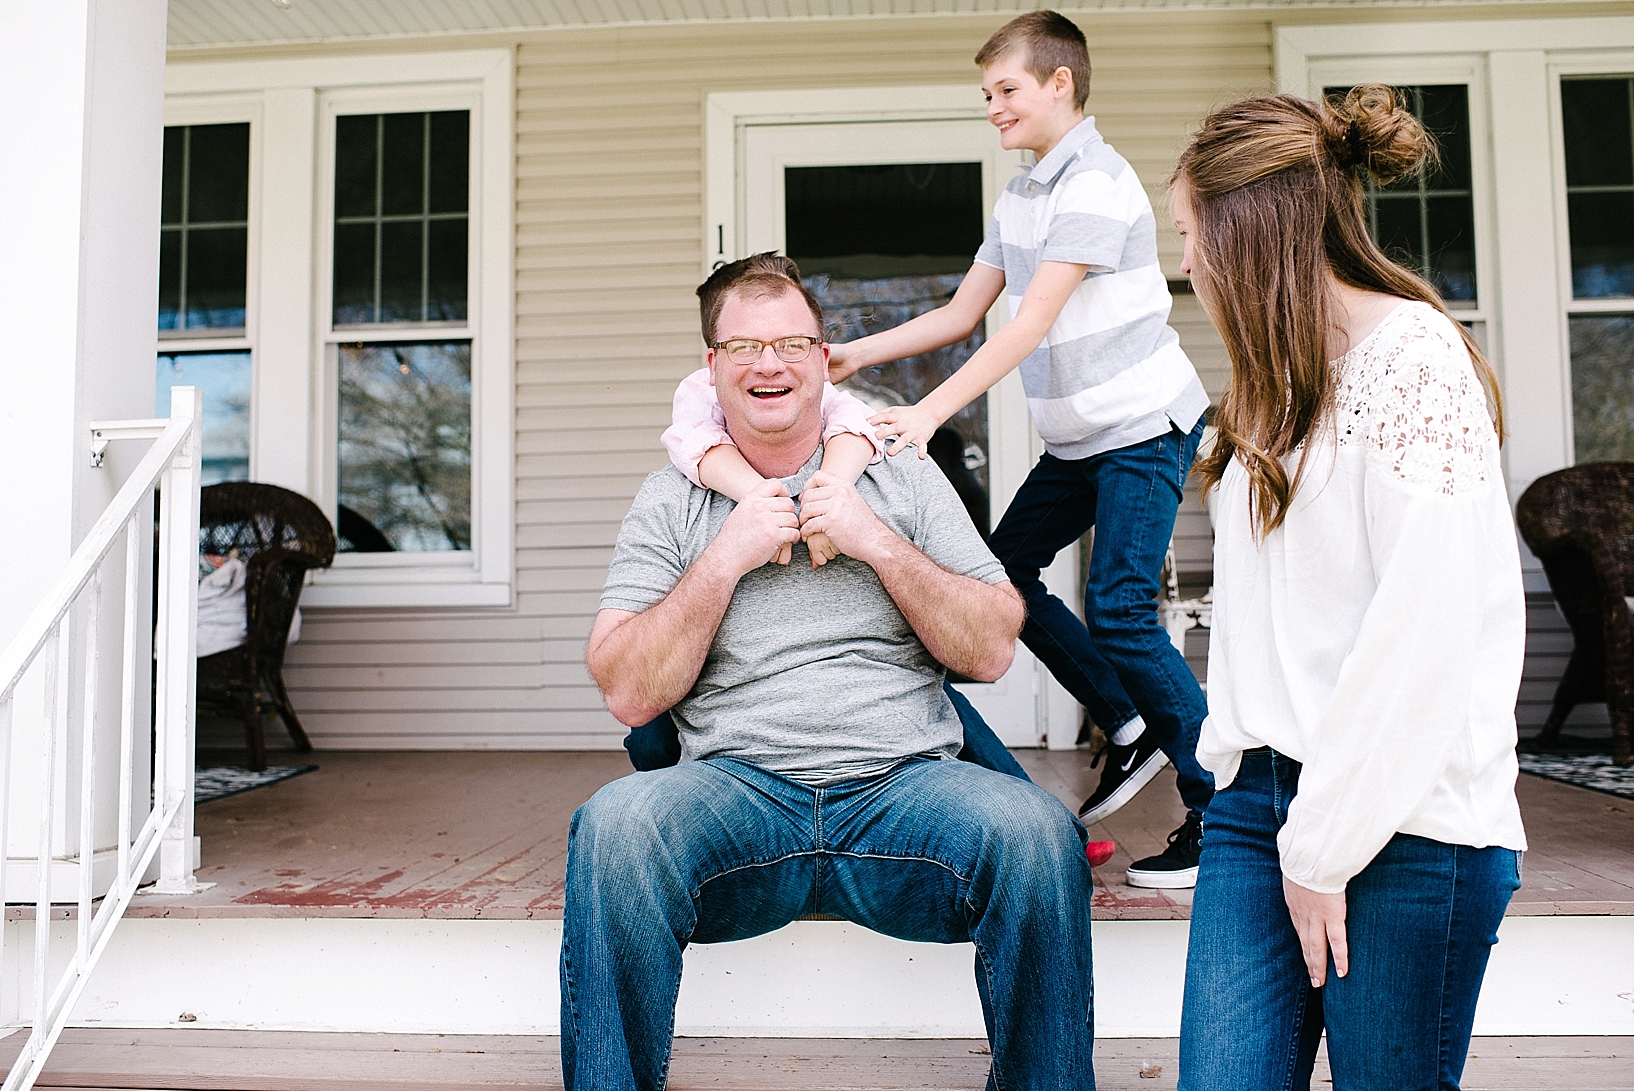 dad wrestling with kids on front porch of house